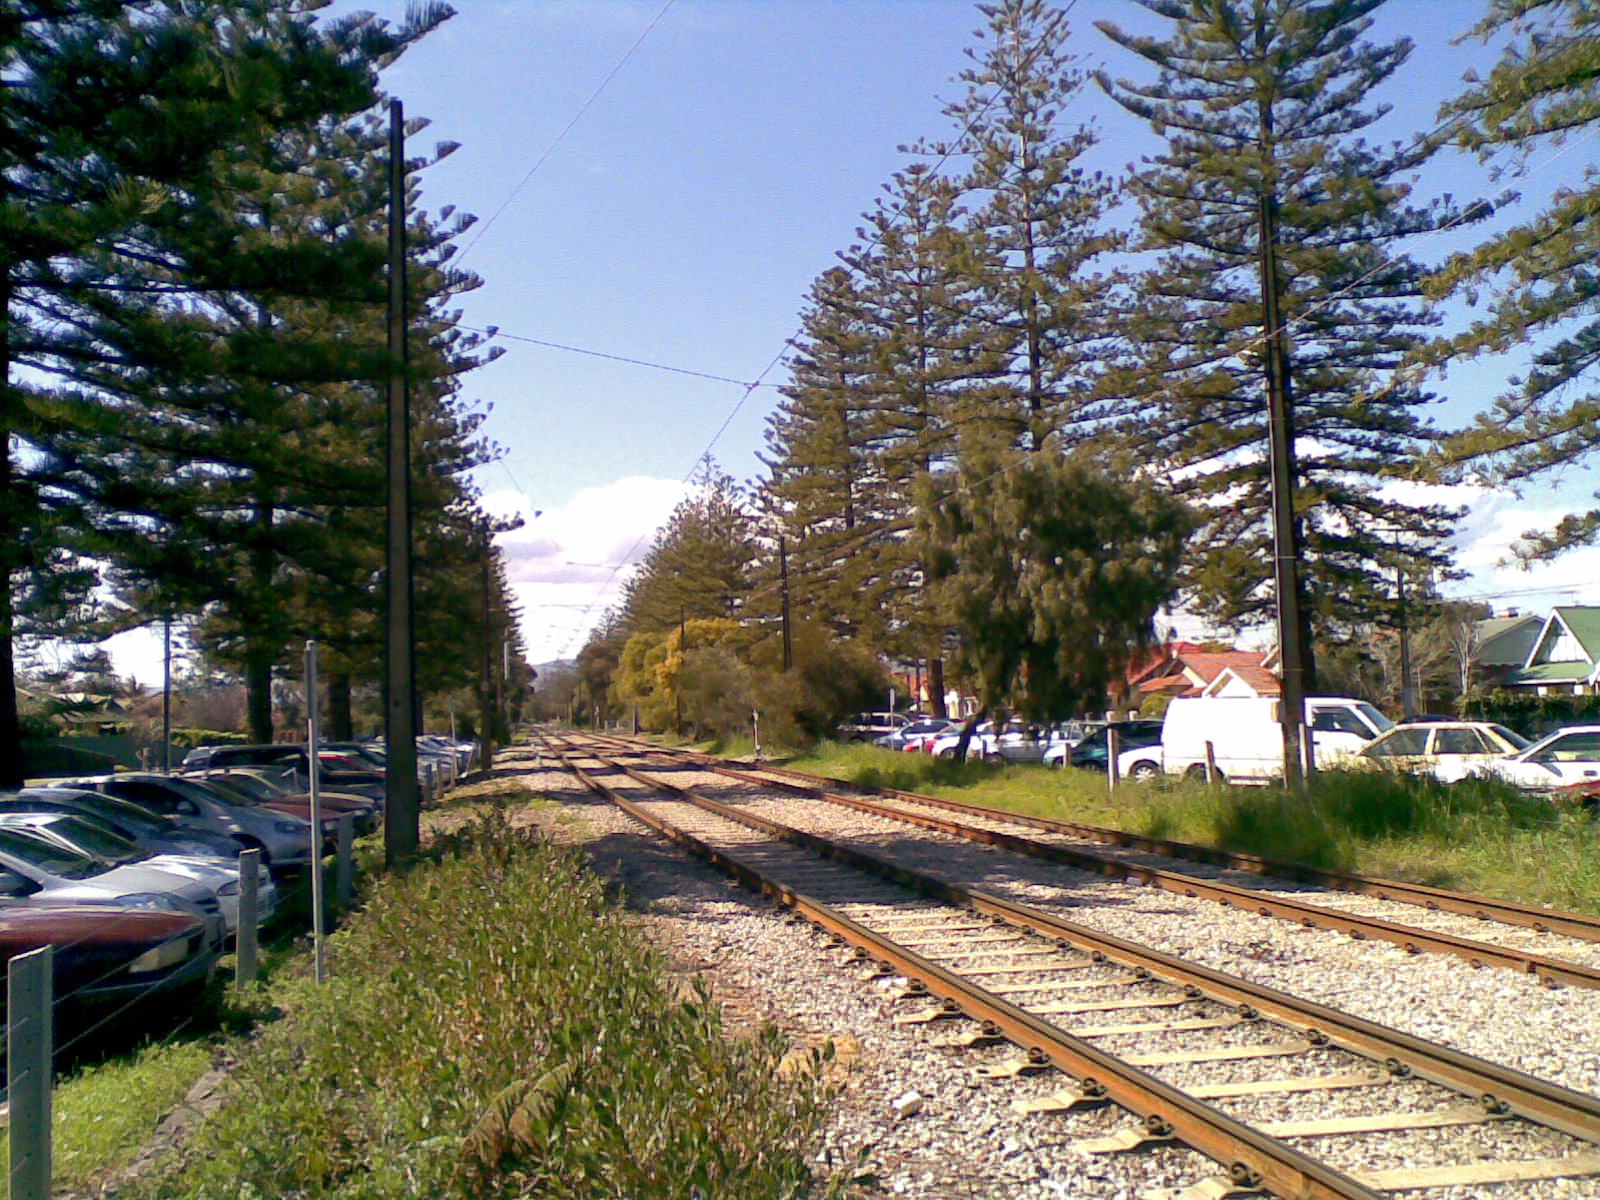 view of a train track near several parked cars